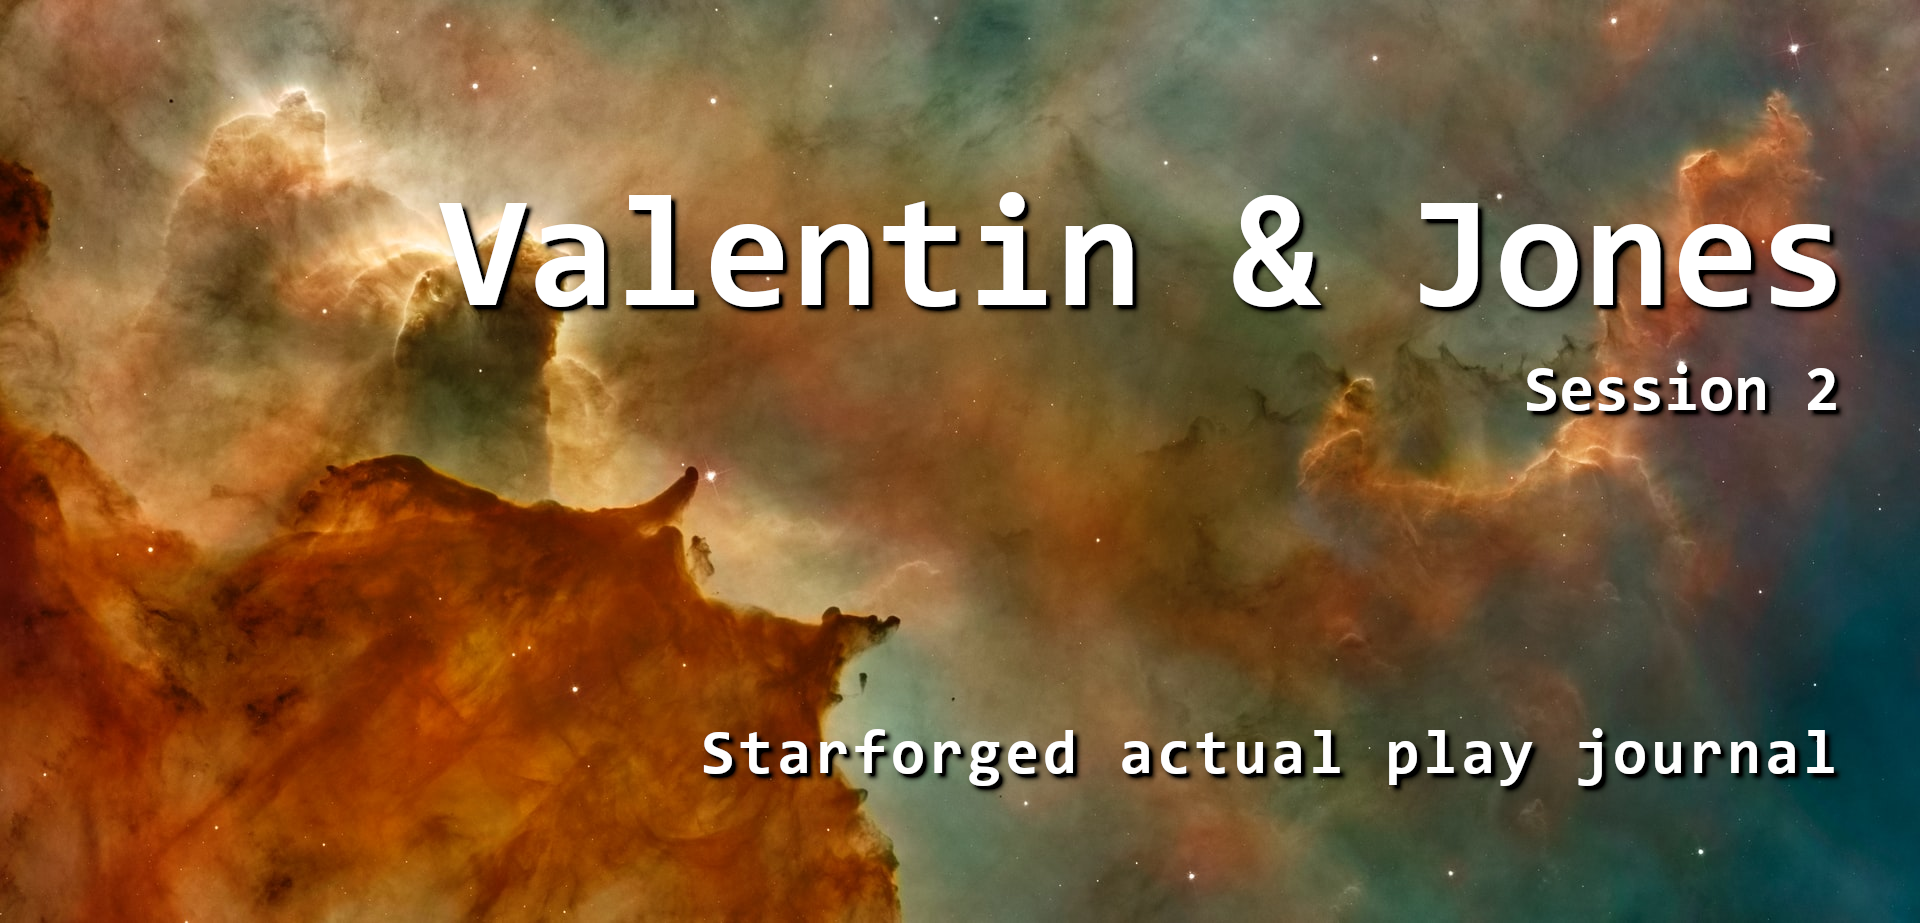 Valentin & Jones, Session 2, Starforged actual play journal